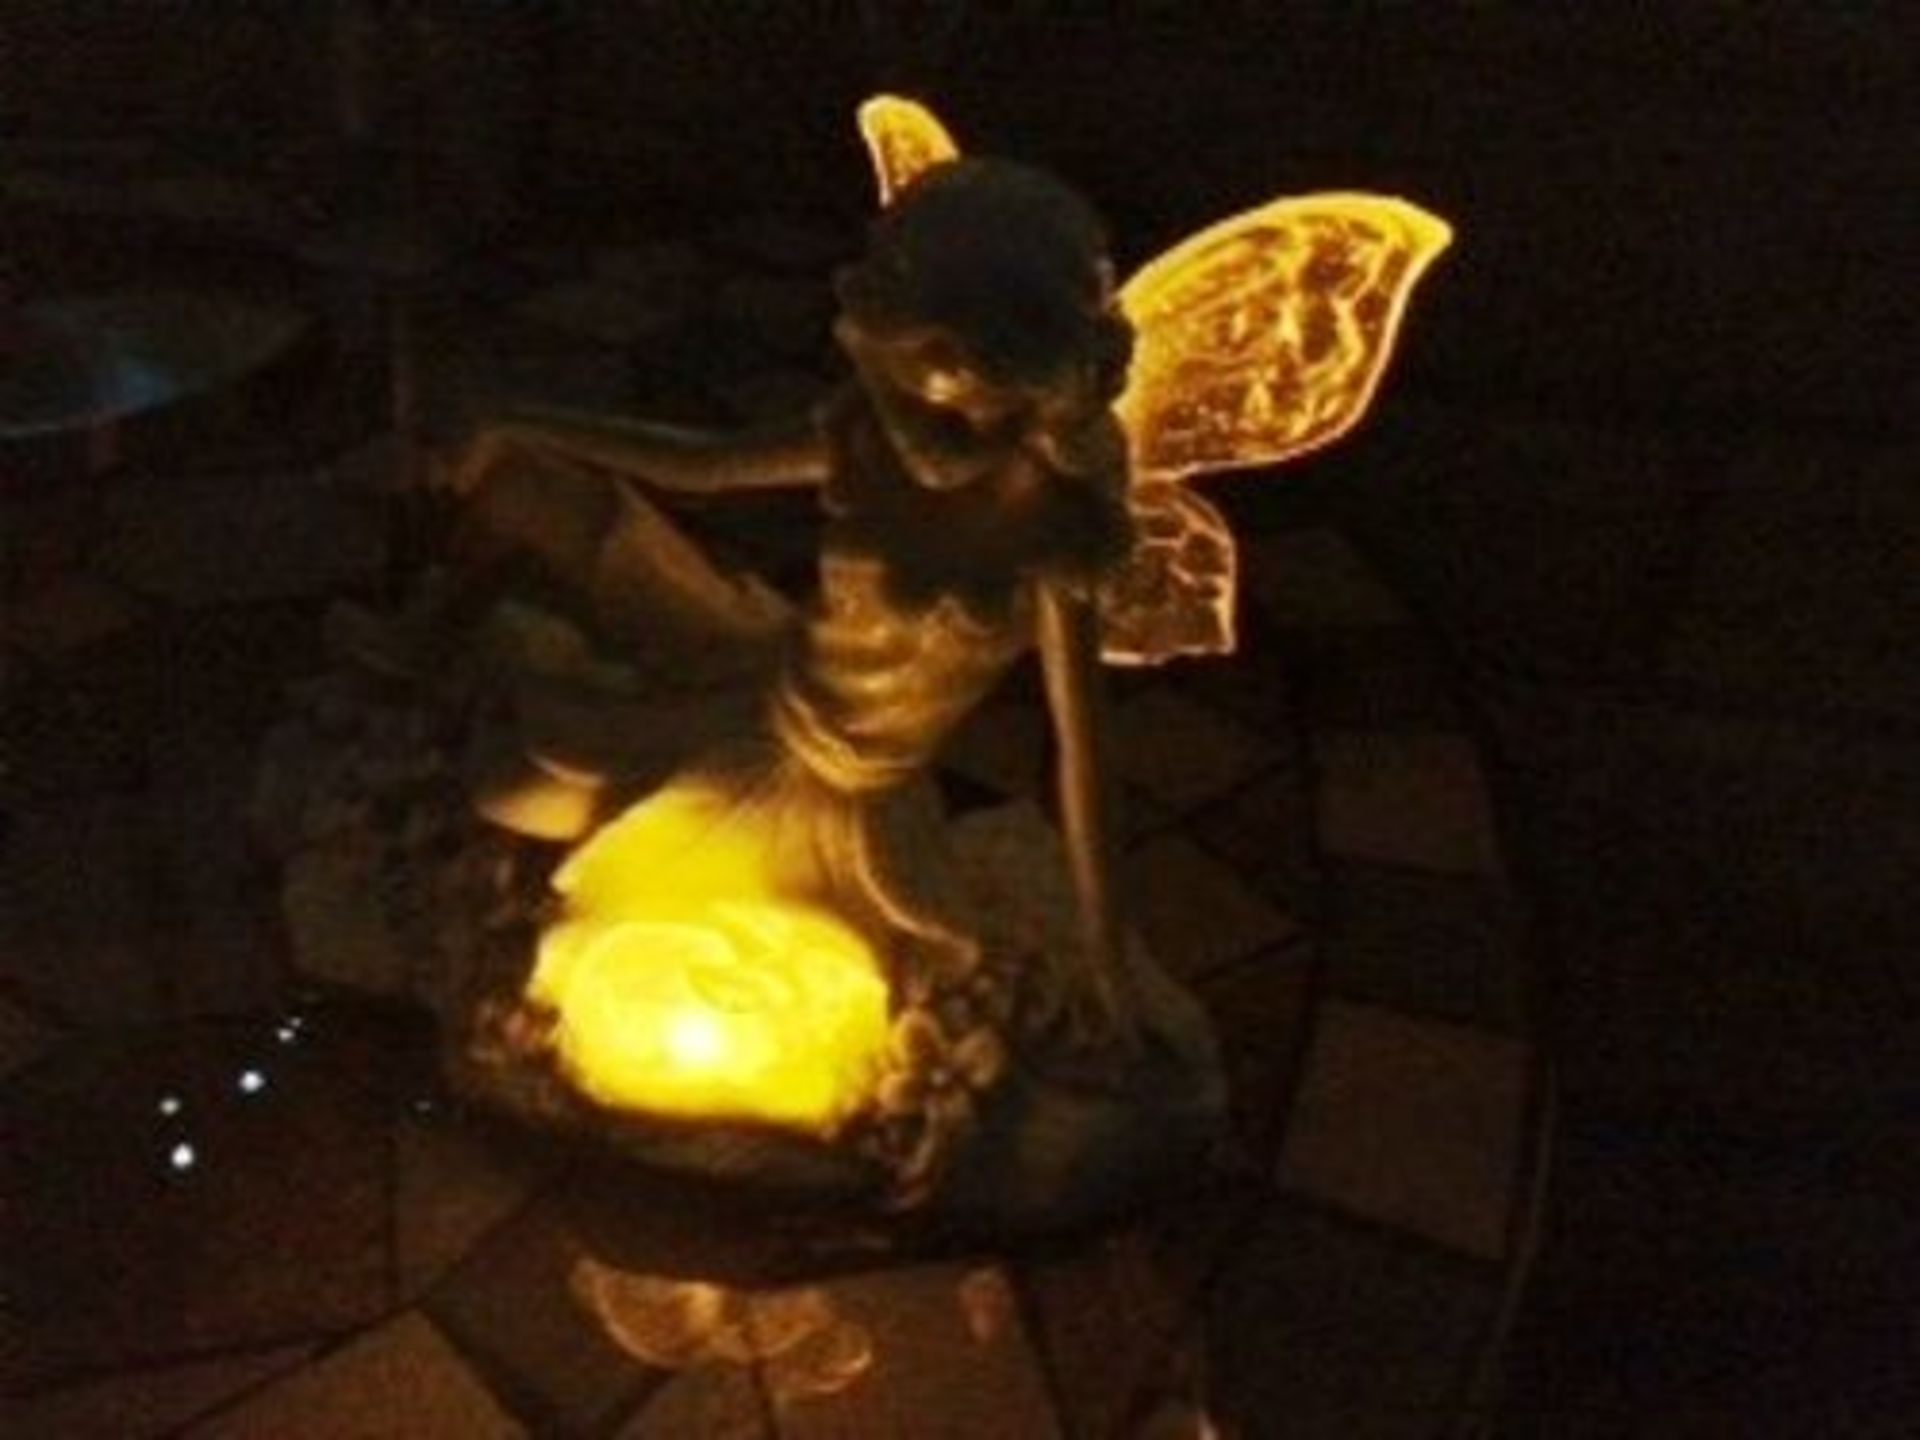 2x Fairy Garden Ornament With Solar Light Up Wings And Rabbit - Image 2 of 2